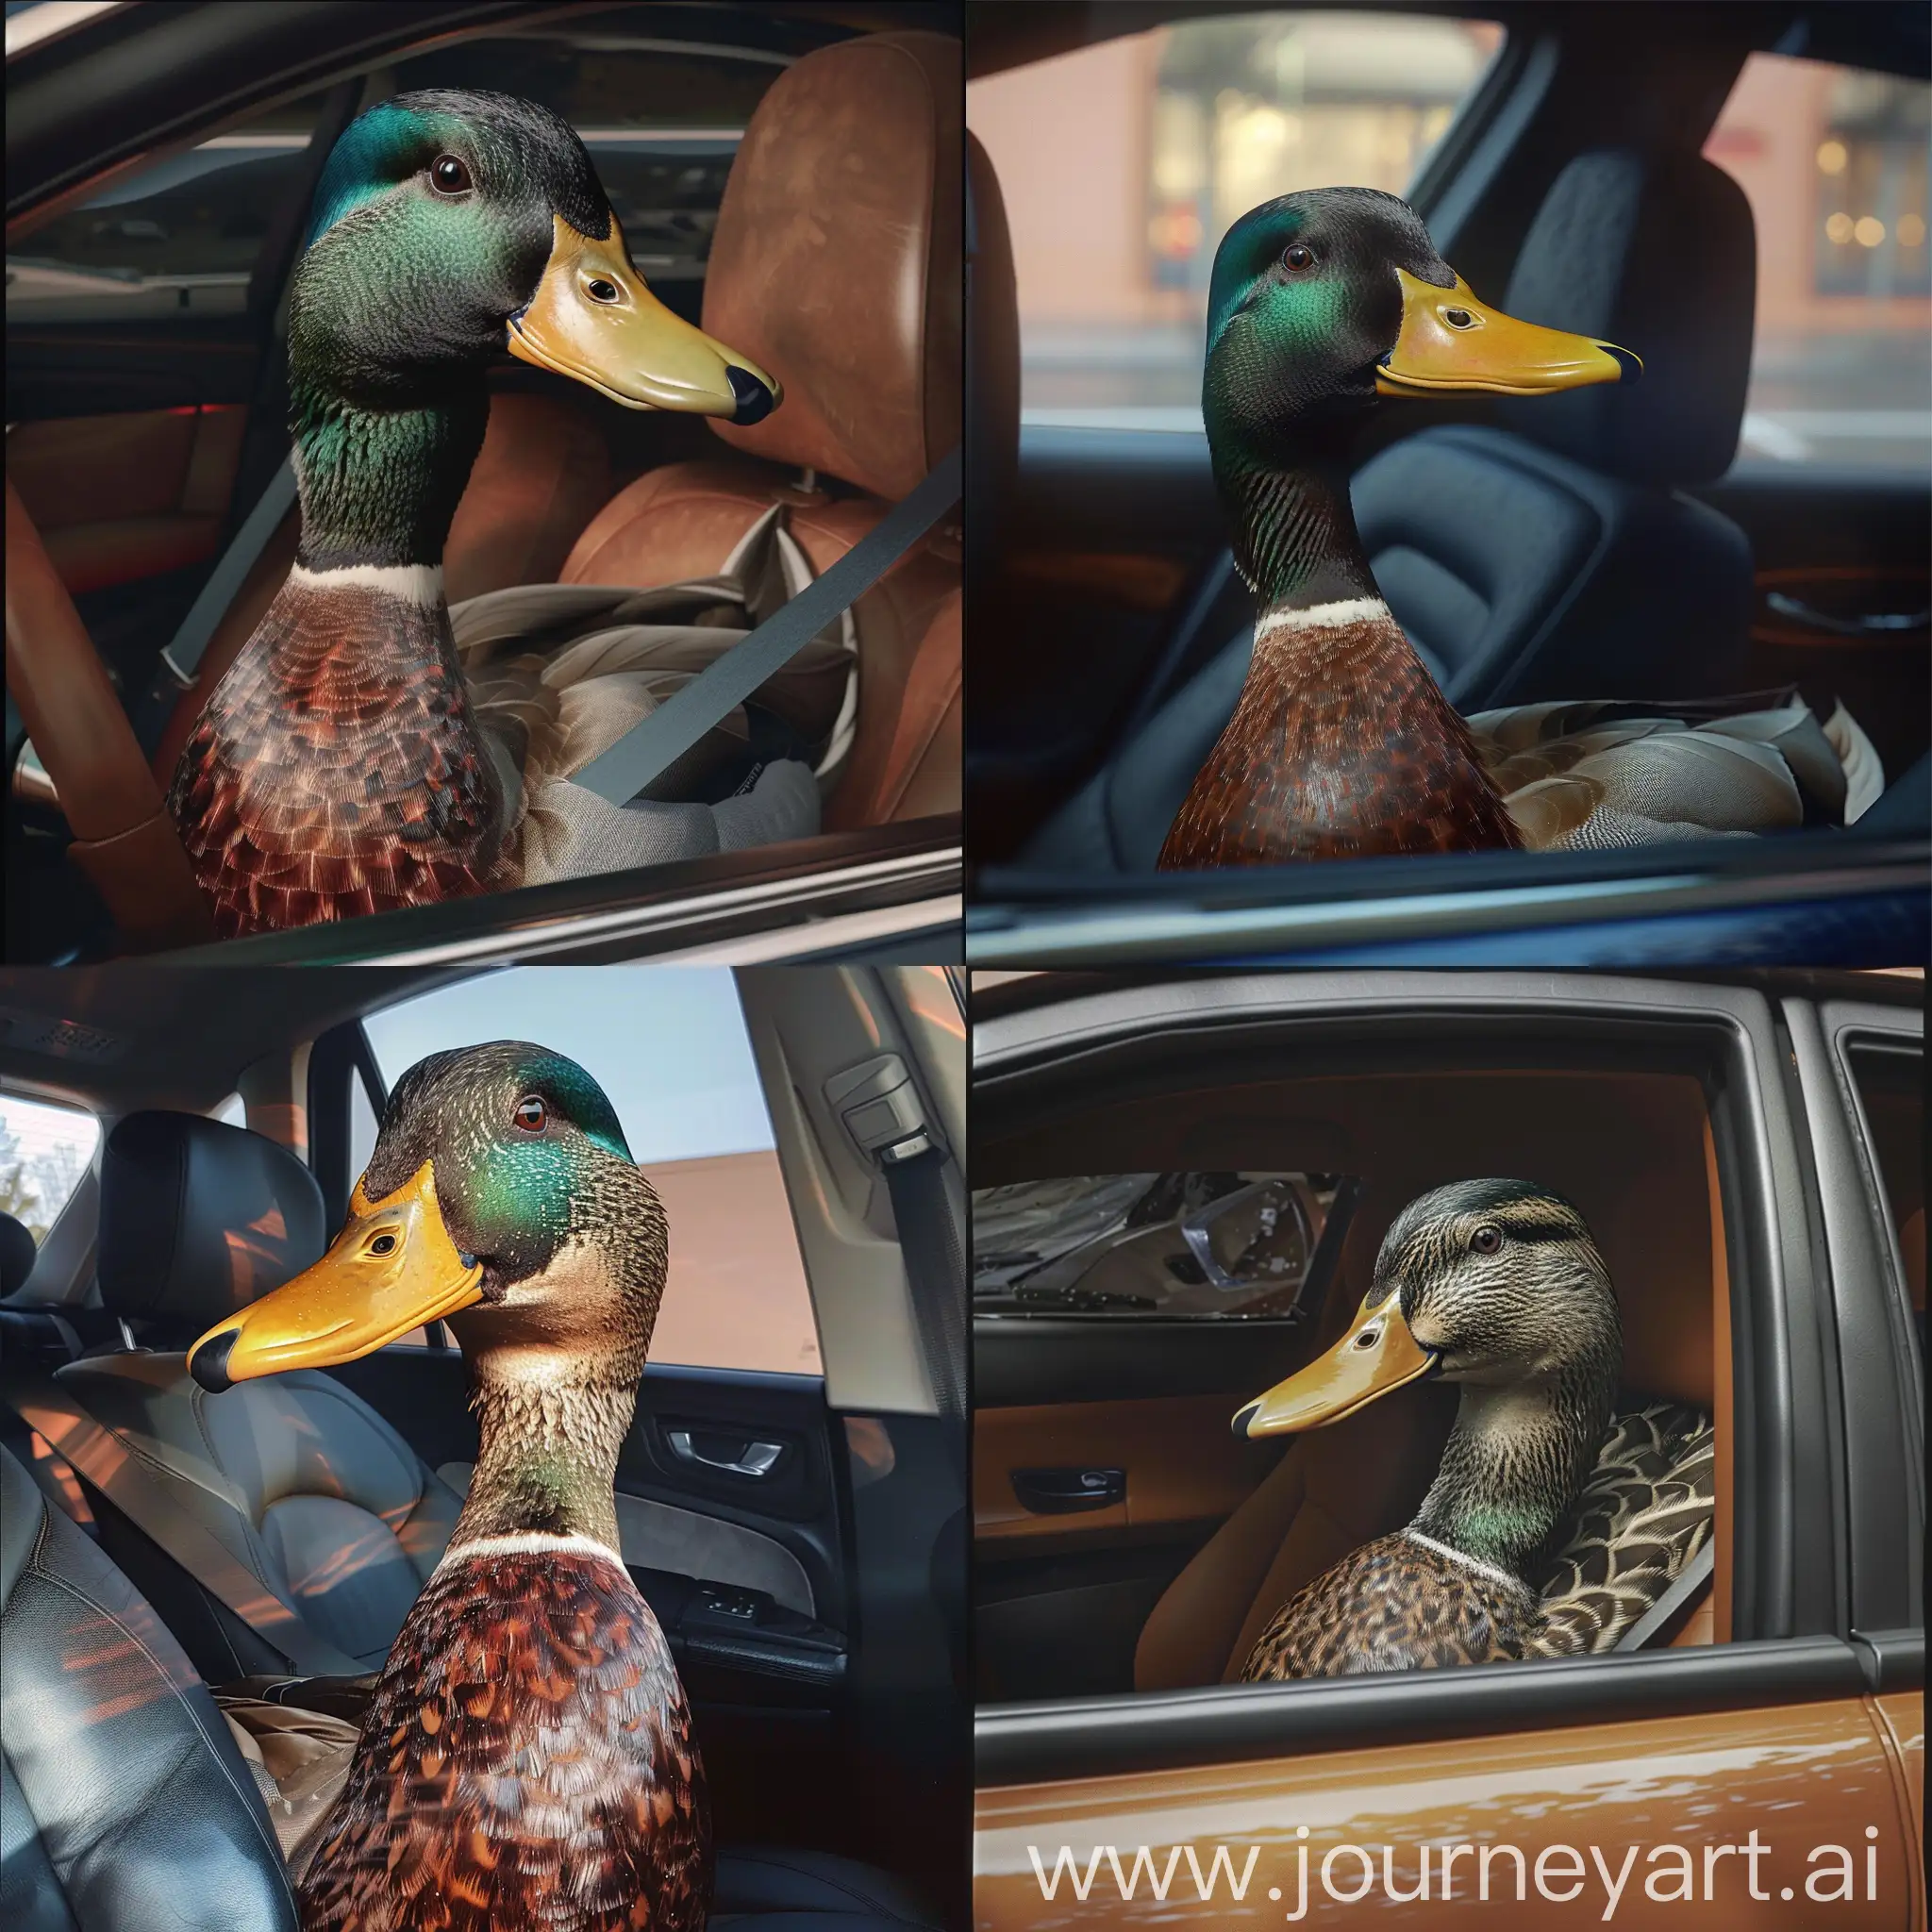 Hyperrealistic-Duck-Passenger-in-Car-with-Octane-V6-Engine